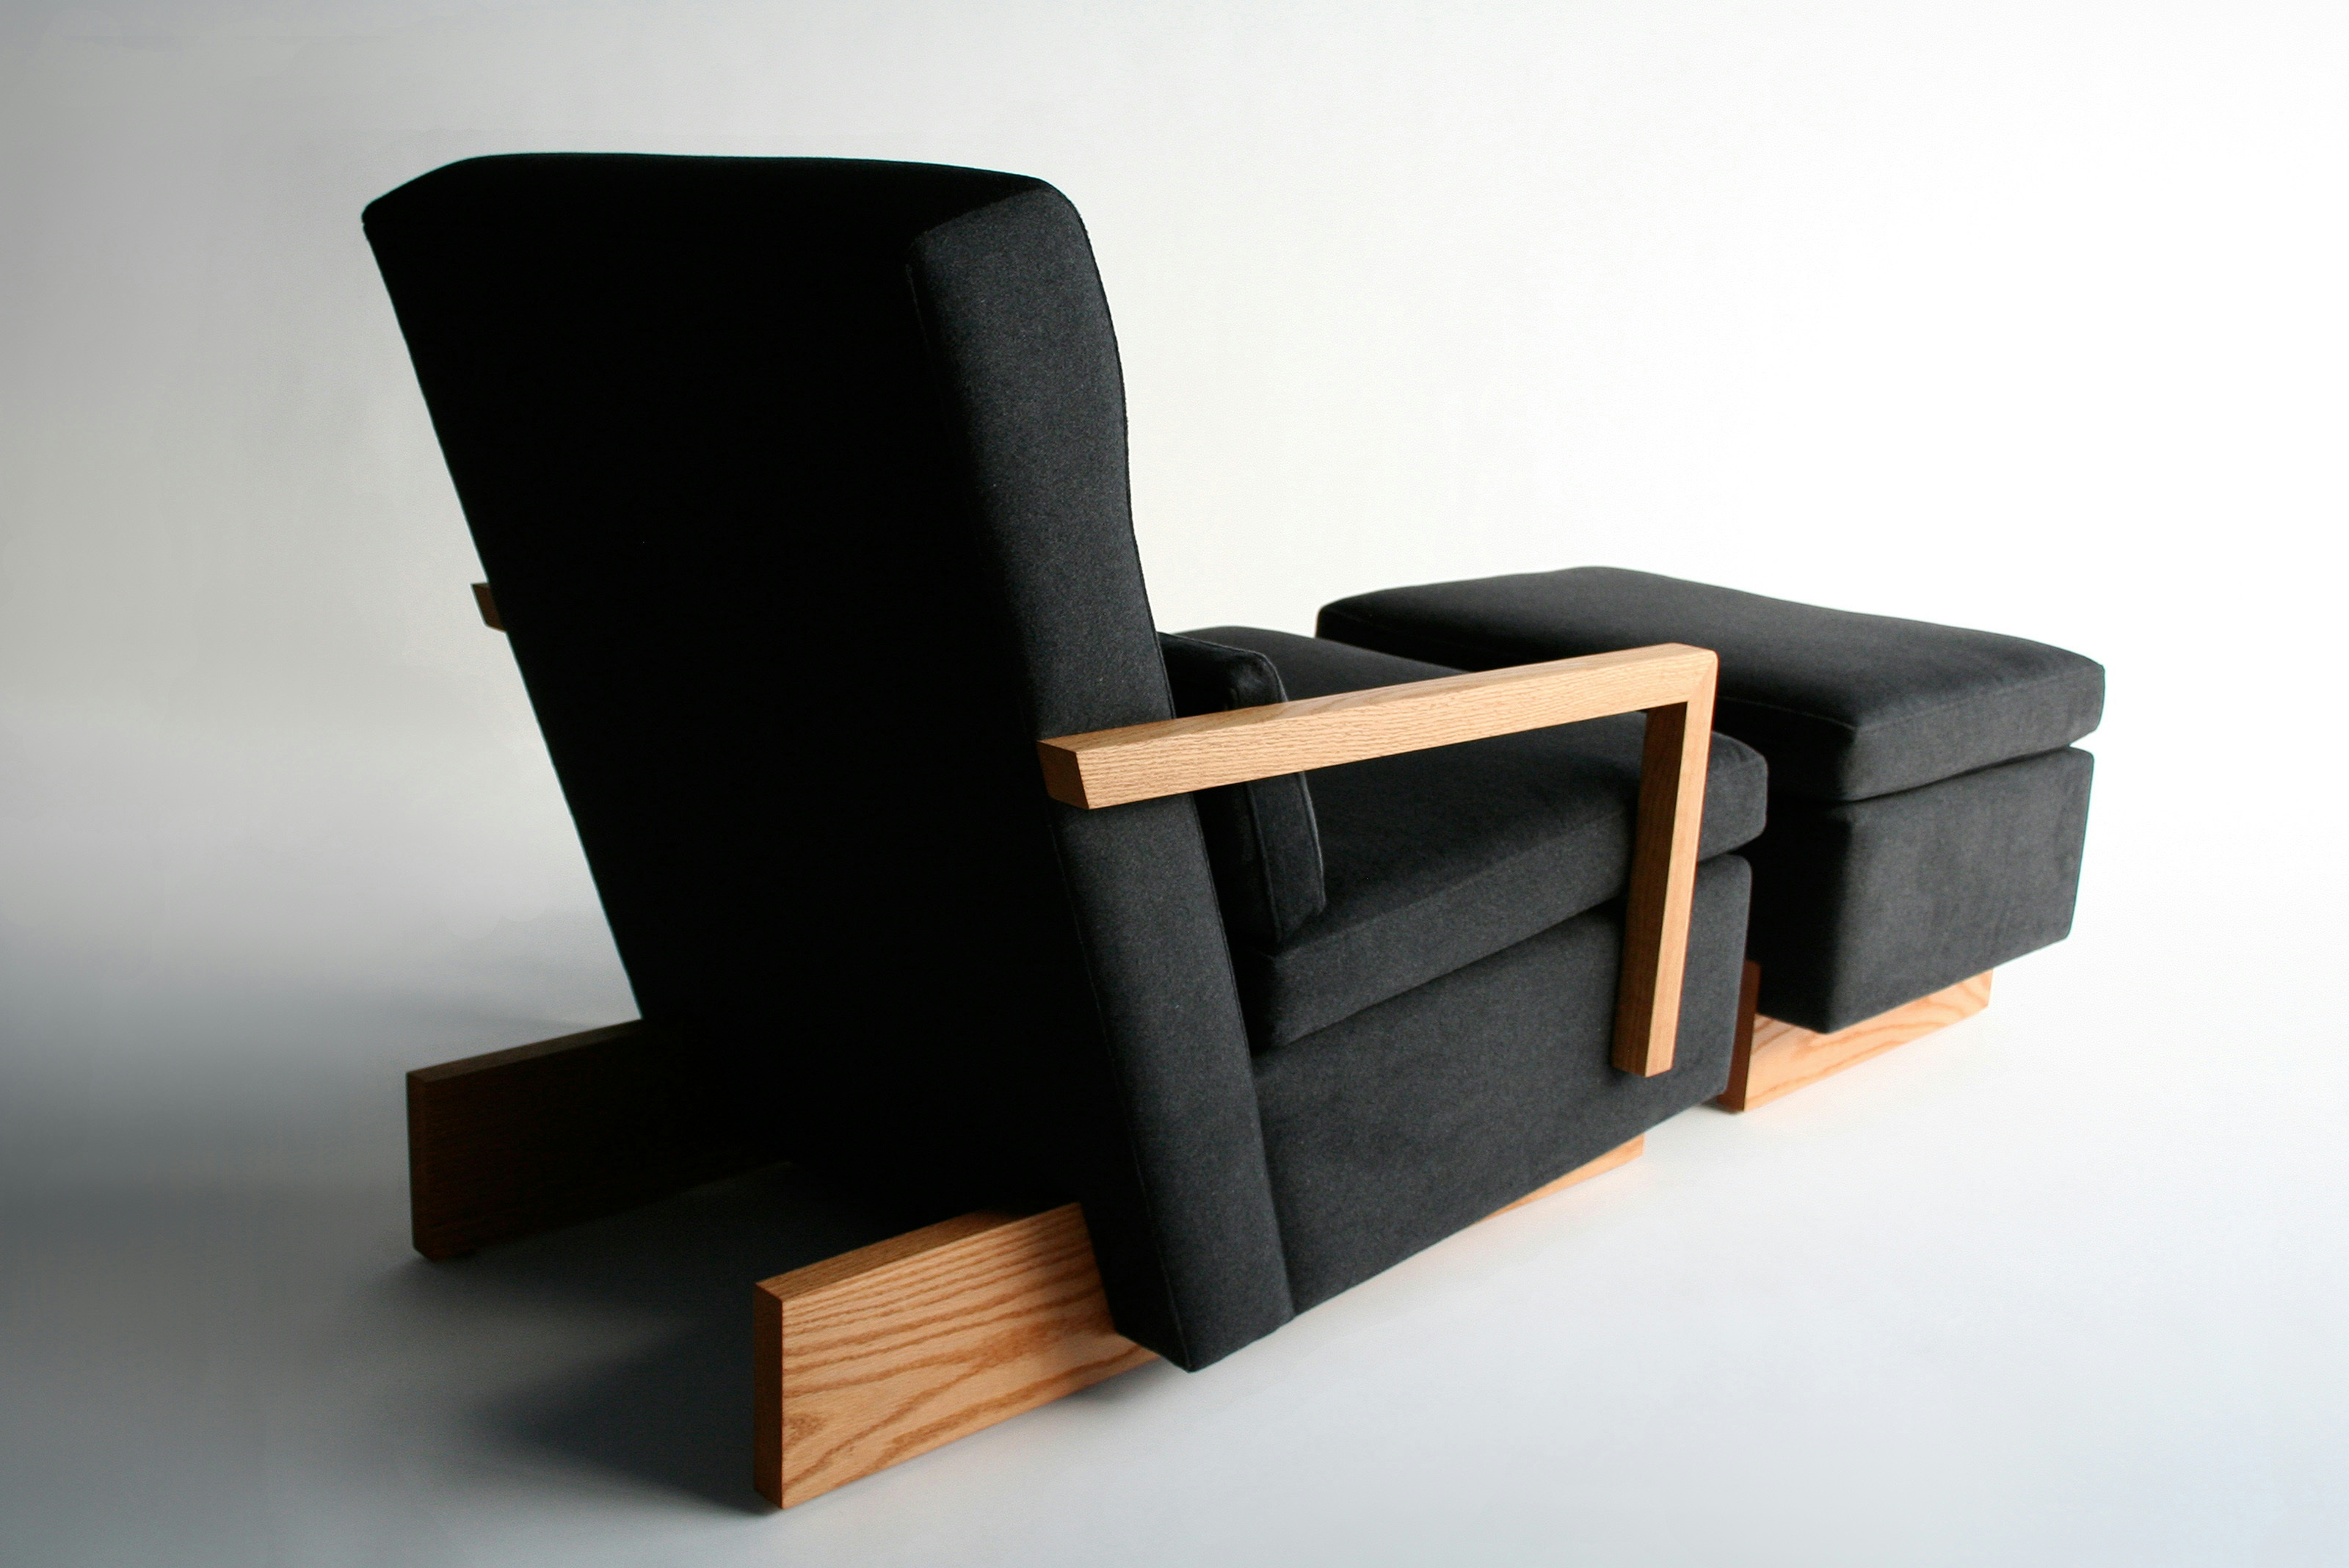 Phase Design Trax Lounge Chair 3 Web